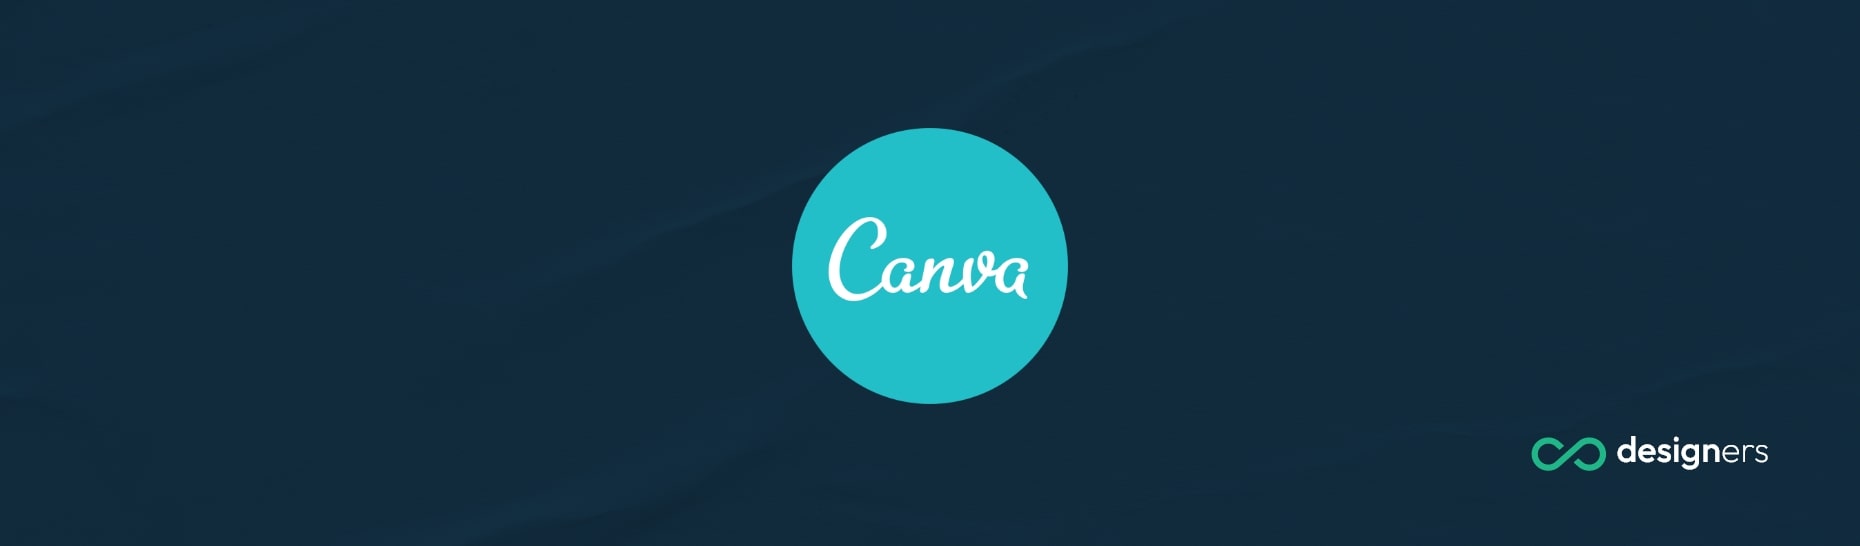 Is Canva a Trusted App?